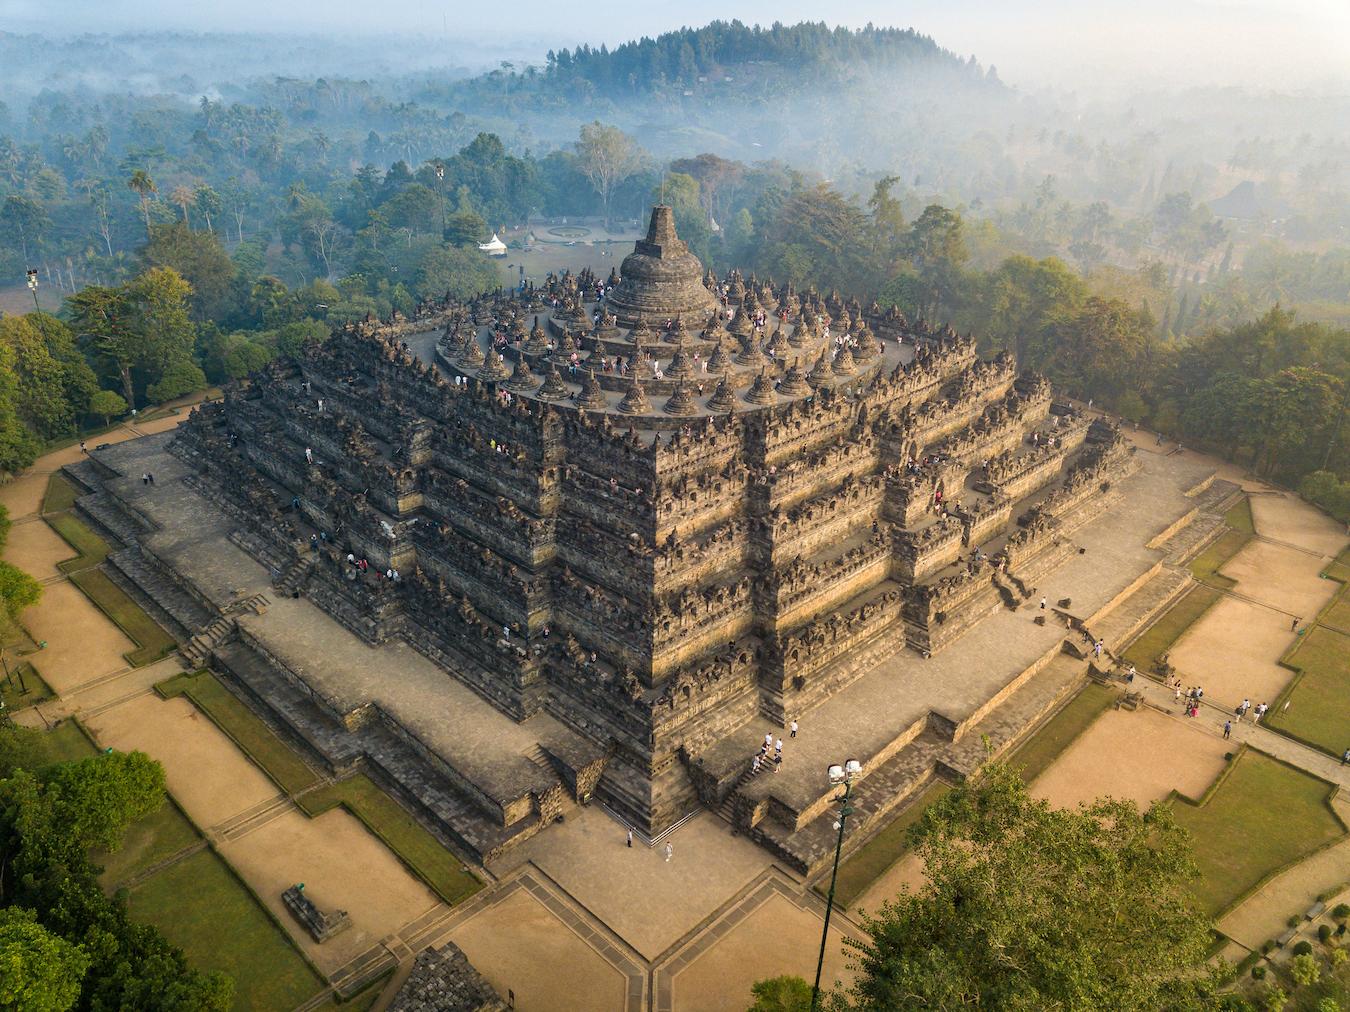 an aerial view of a large temple local people capital city marine resources country's population central jakarta lesser sunda islands southeast asia coral reefs komodo national park indonesia famous things indonesia famous coastal plains central java indonesia is famous indonesian culture